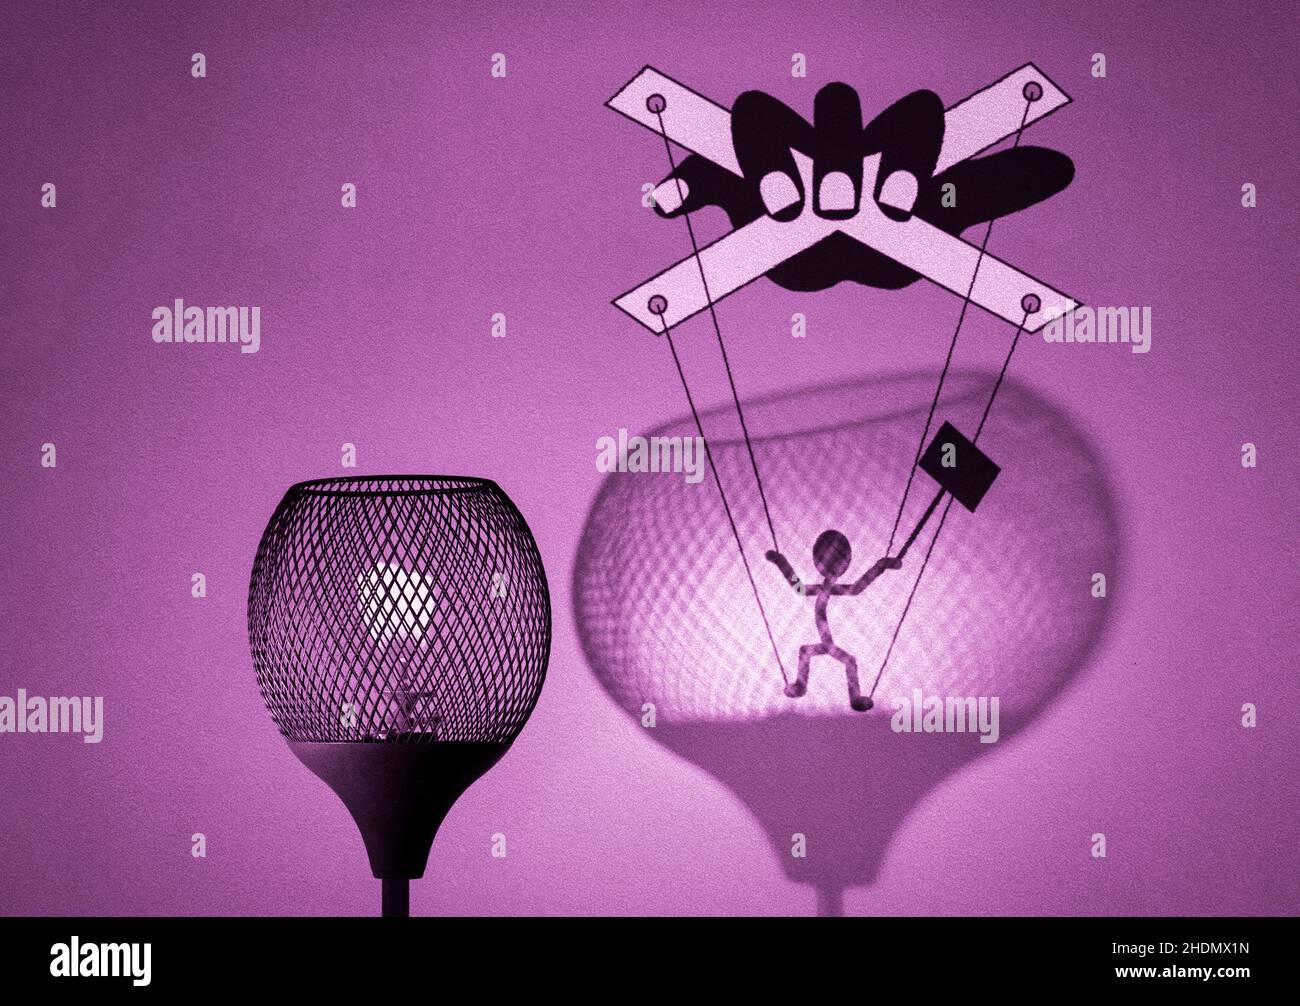 Gaslight with silhouette of puppet on strings being manipulated by a hand in shadow cast by the lamp on wall gaslighting concept illustration Stock Photo